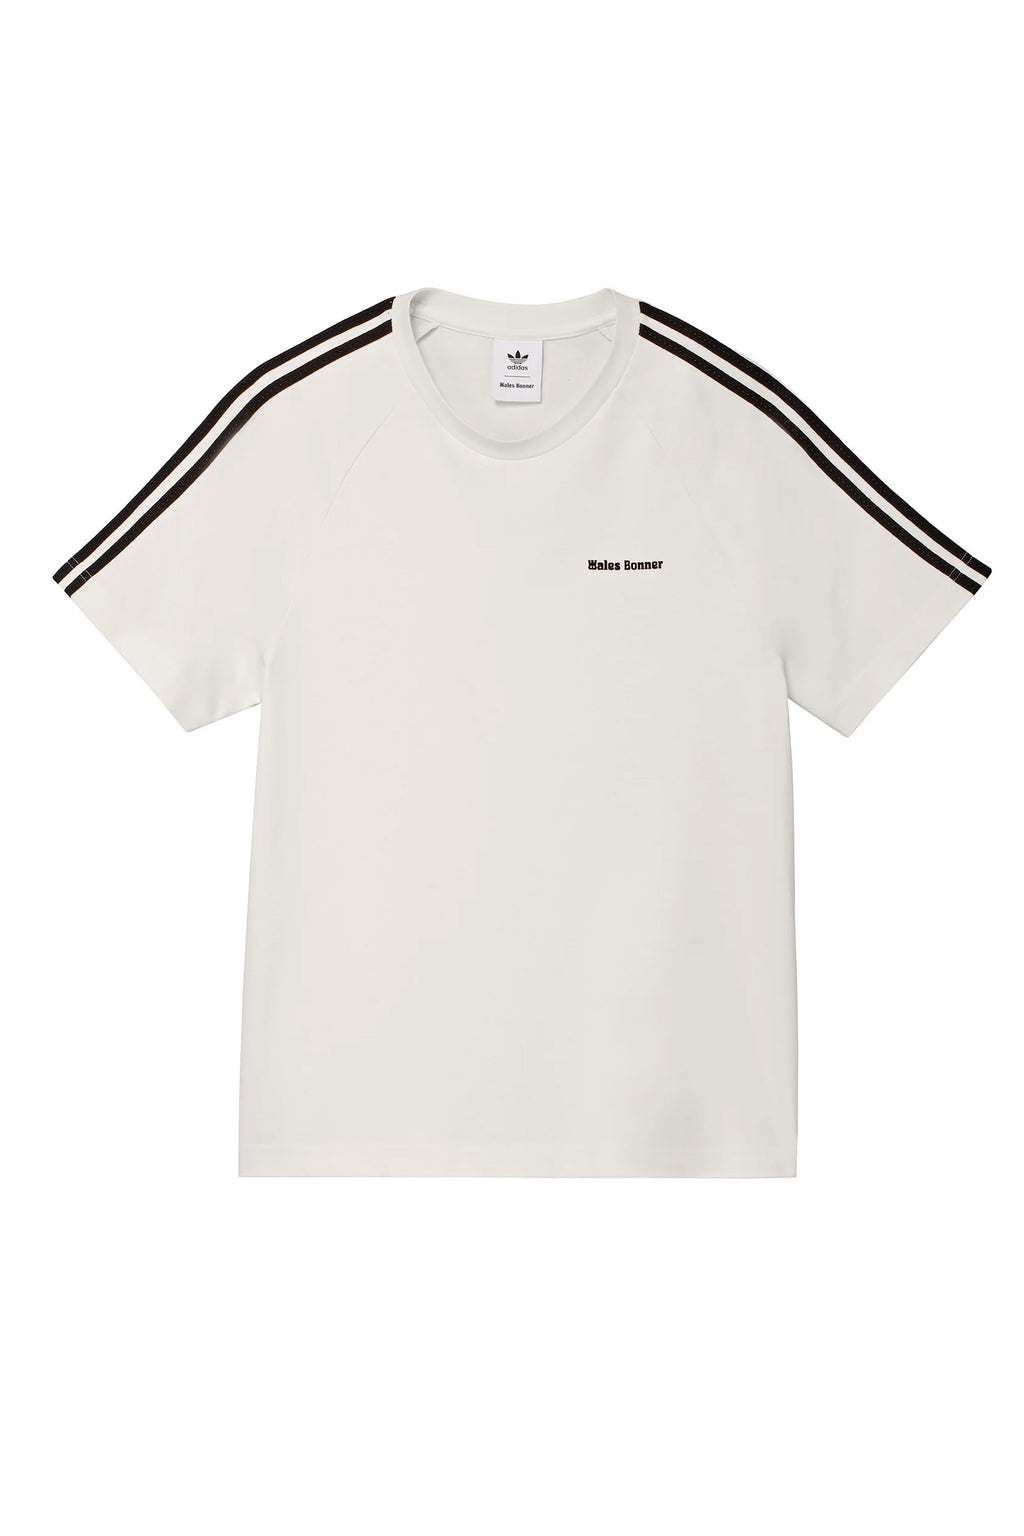 / ORIGINALS S/S ADIDAS NUBIAN TEE - WB BY WALES BONNER FW23 WHT